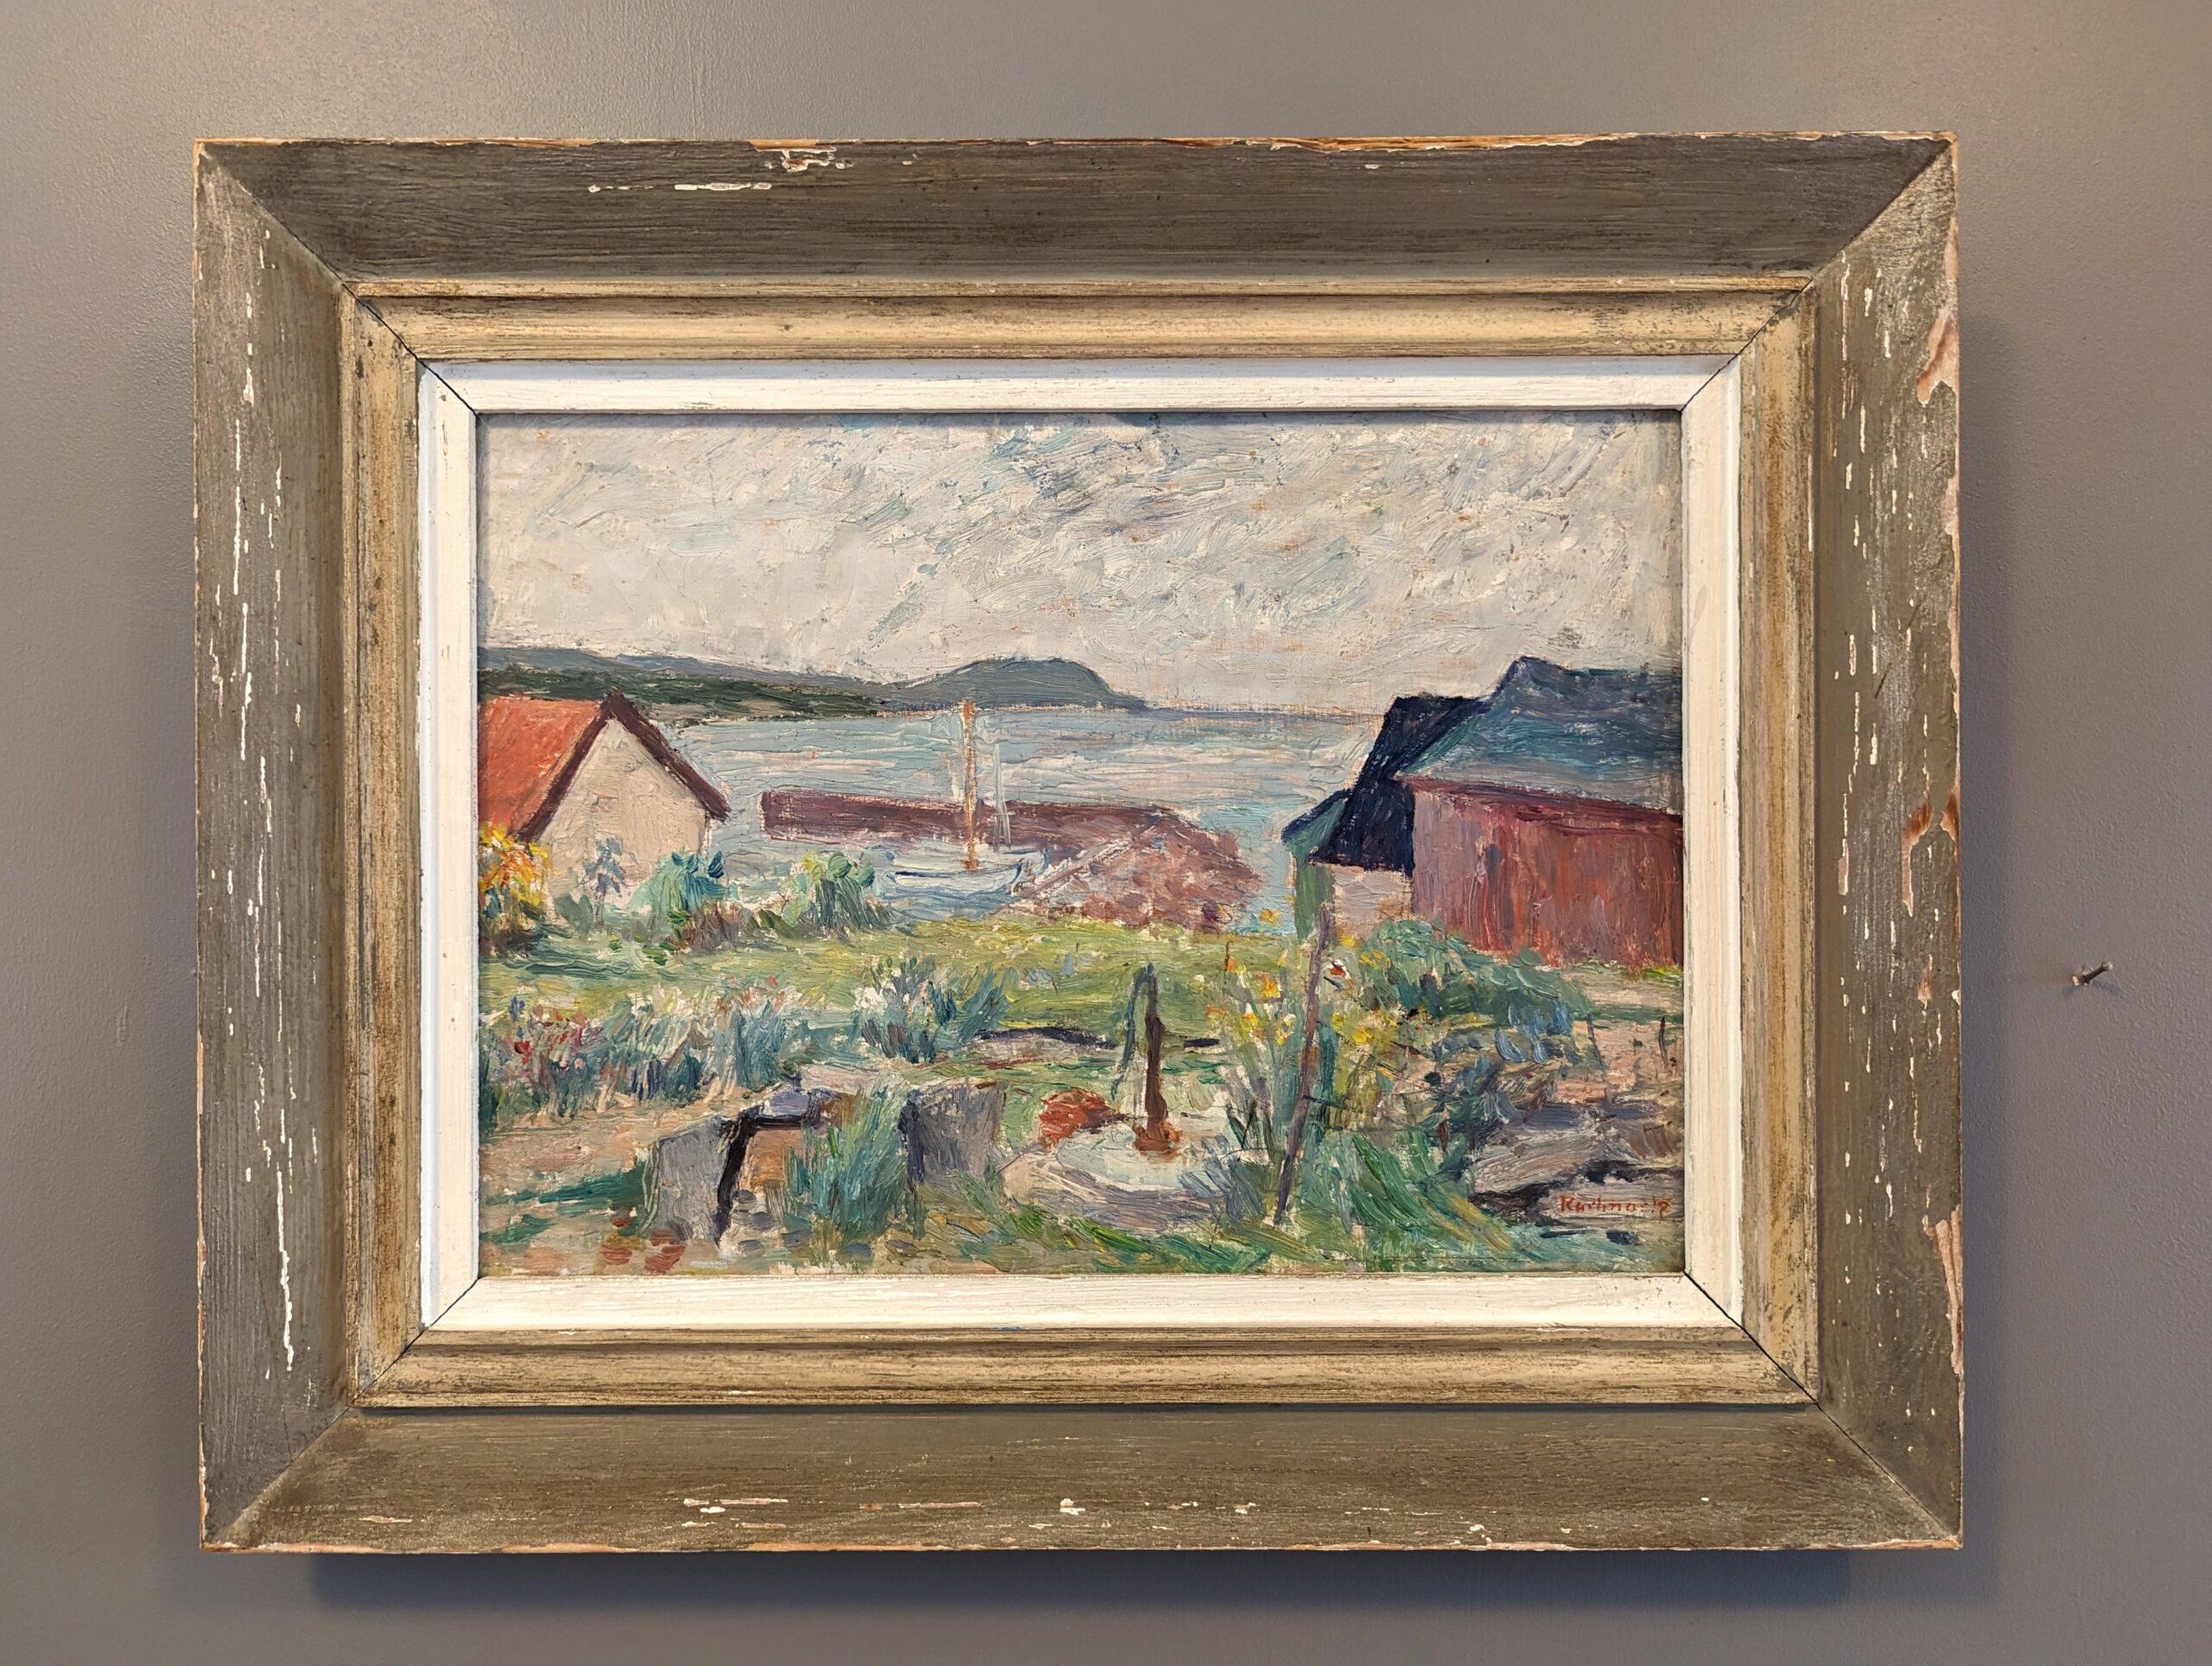 COASTAL BREEZE
Size: 37 x 45.5 cm (including frame)
Oil on Board

A very pleasant and atmospheric mid-century expressive coastal landscape composition, executed in oil onto board.

The scene depicts houses nestled amidst lush greenery along a